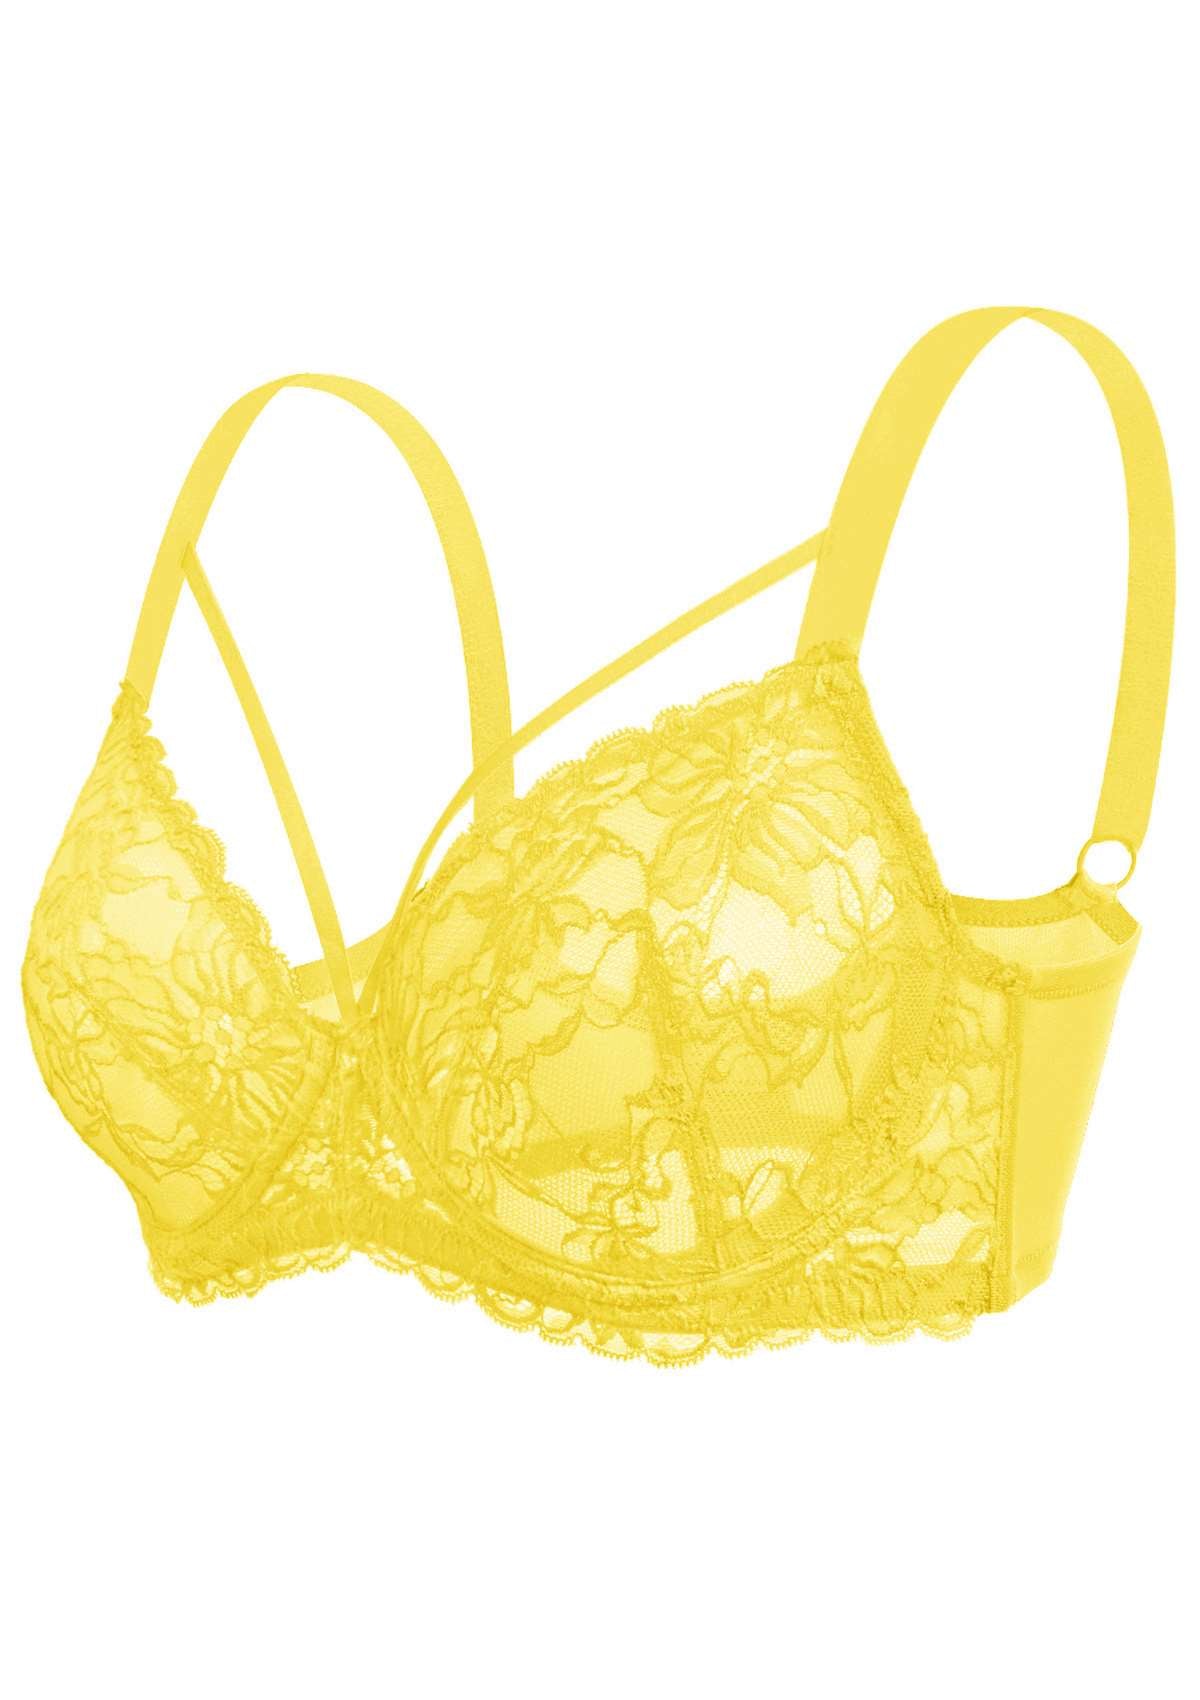 HSIA Unlined Lace Mesh Minimizer Bra For Large Breasts, Full Coverage - Bright Yellow / 34 / C